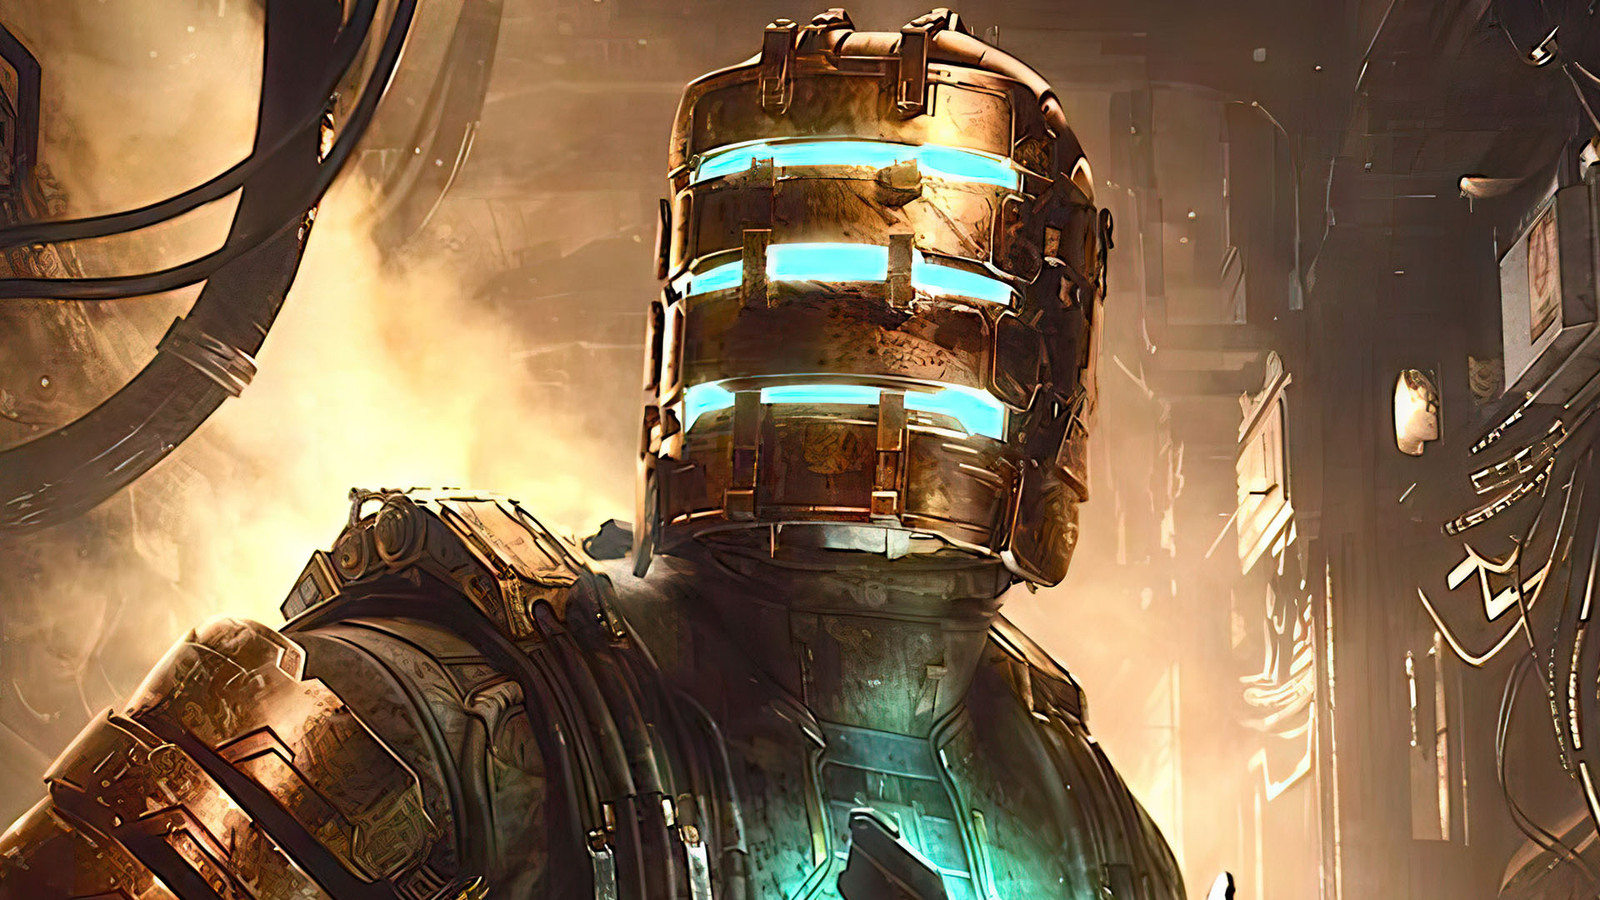 Dead Space Tech Review: This Is What A Best In Class Remake Looks Like